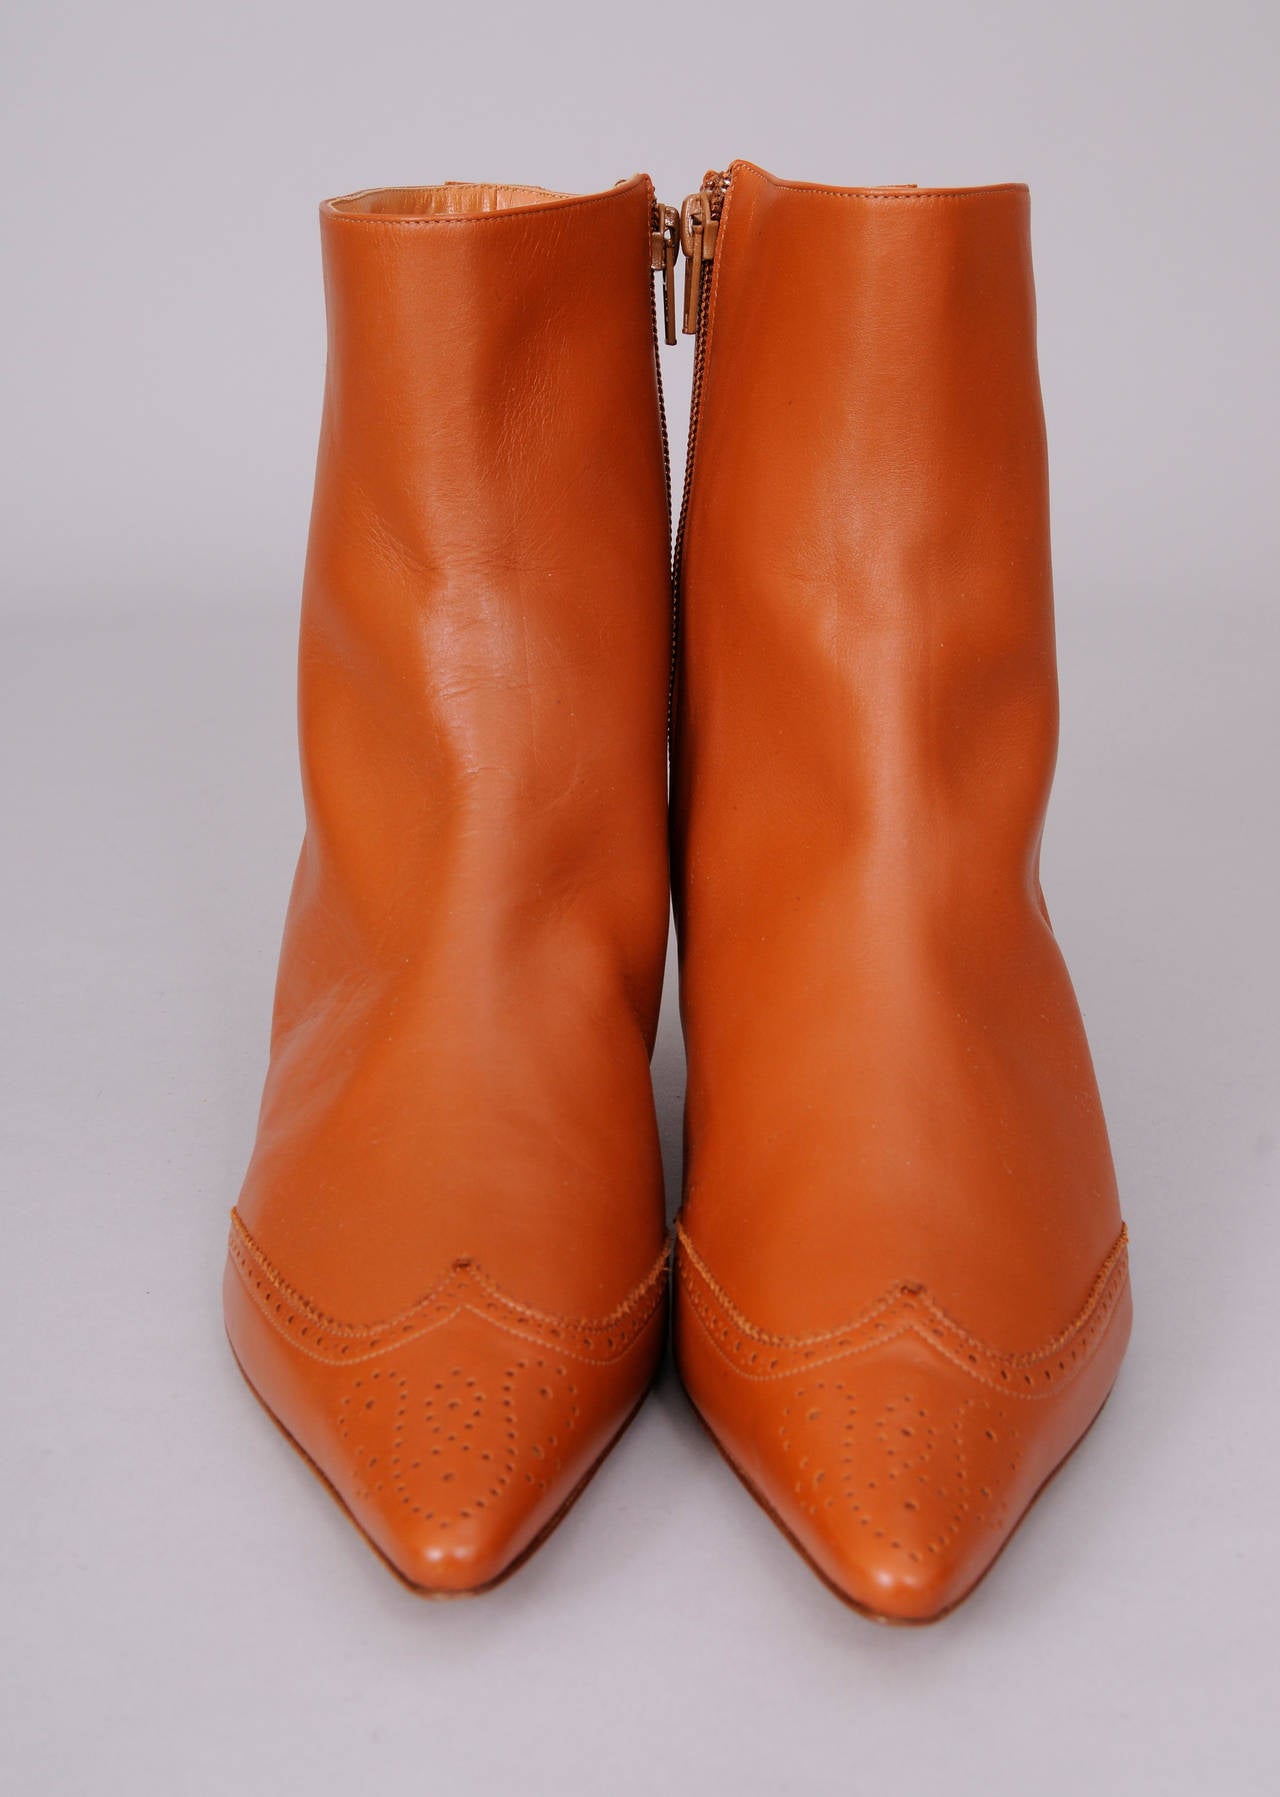 Soft caramel colored leather has a pierced decoration on the  toe cap as well as on the heel, running up the center back. The boots have a low heel, they are marked a size 40.5 and they have never been worn. They are in excellent condition.